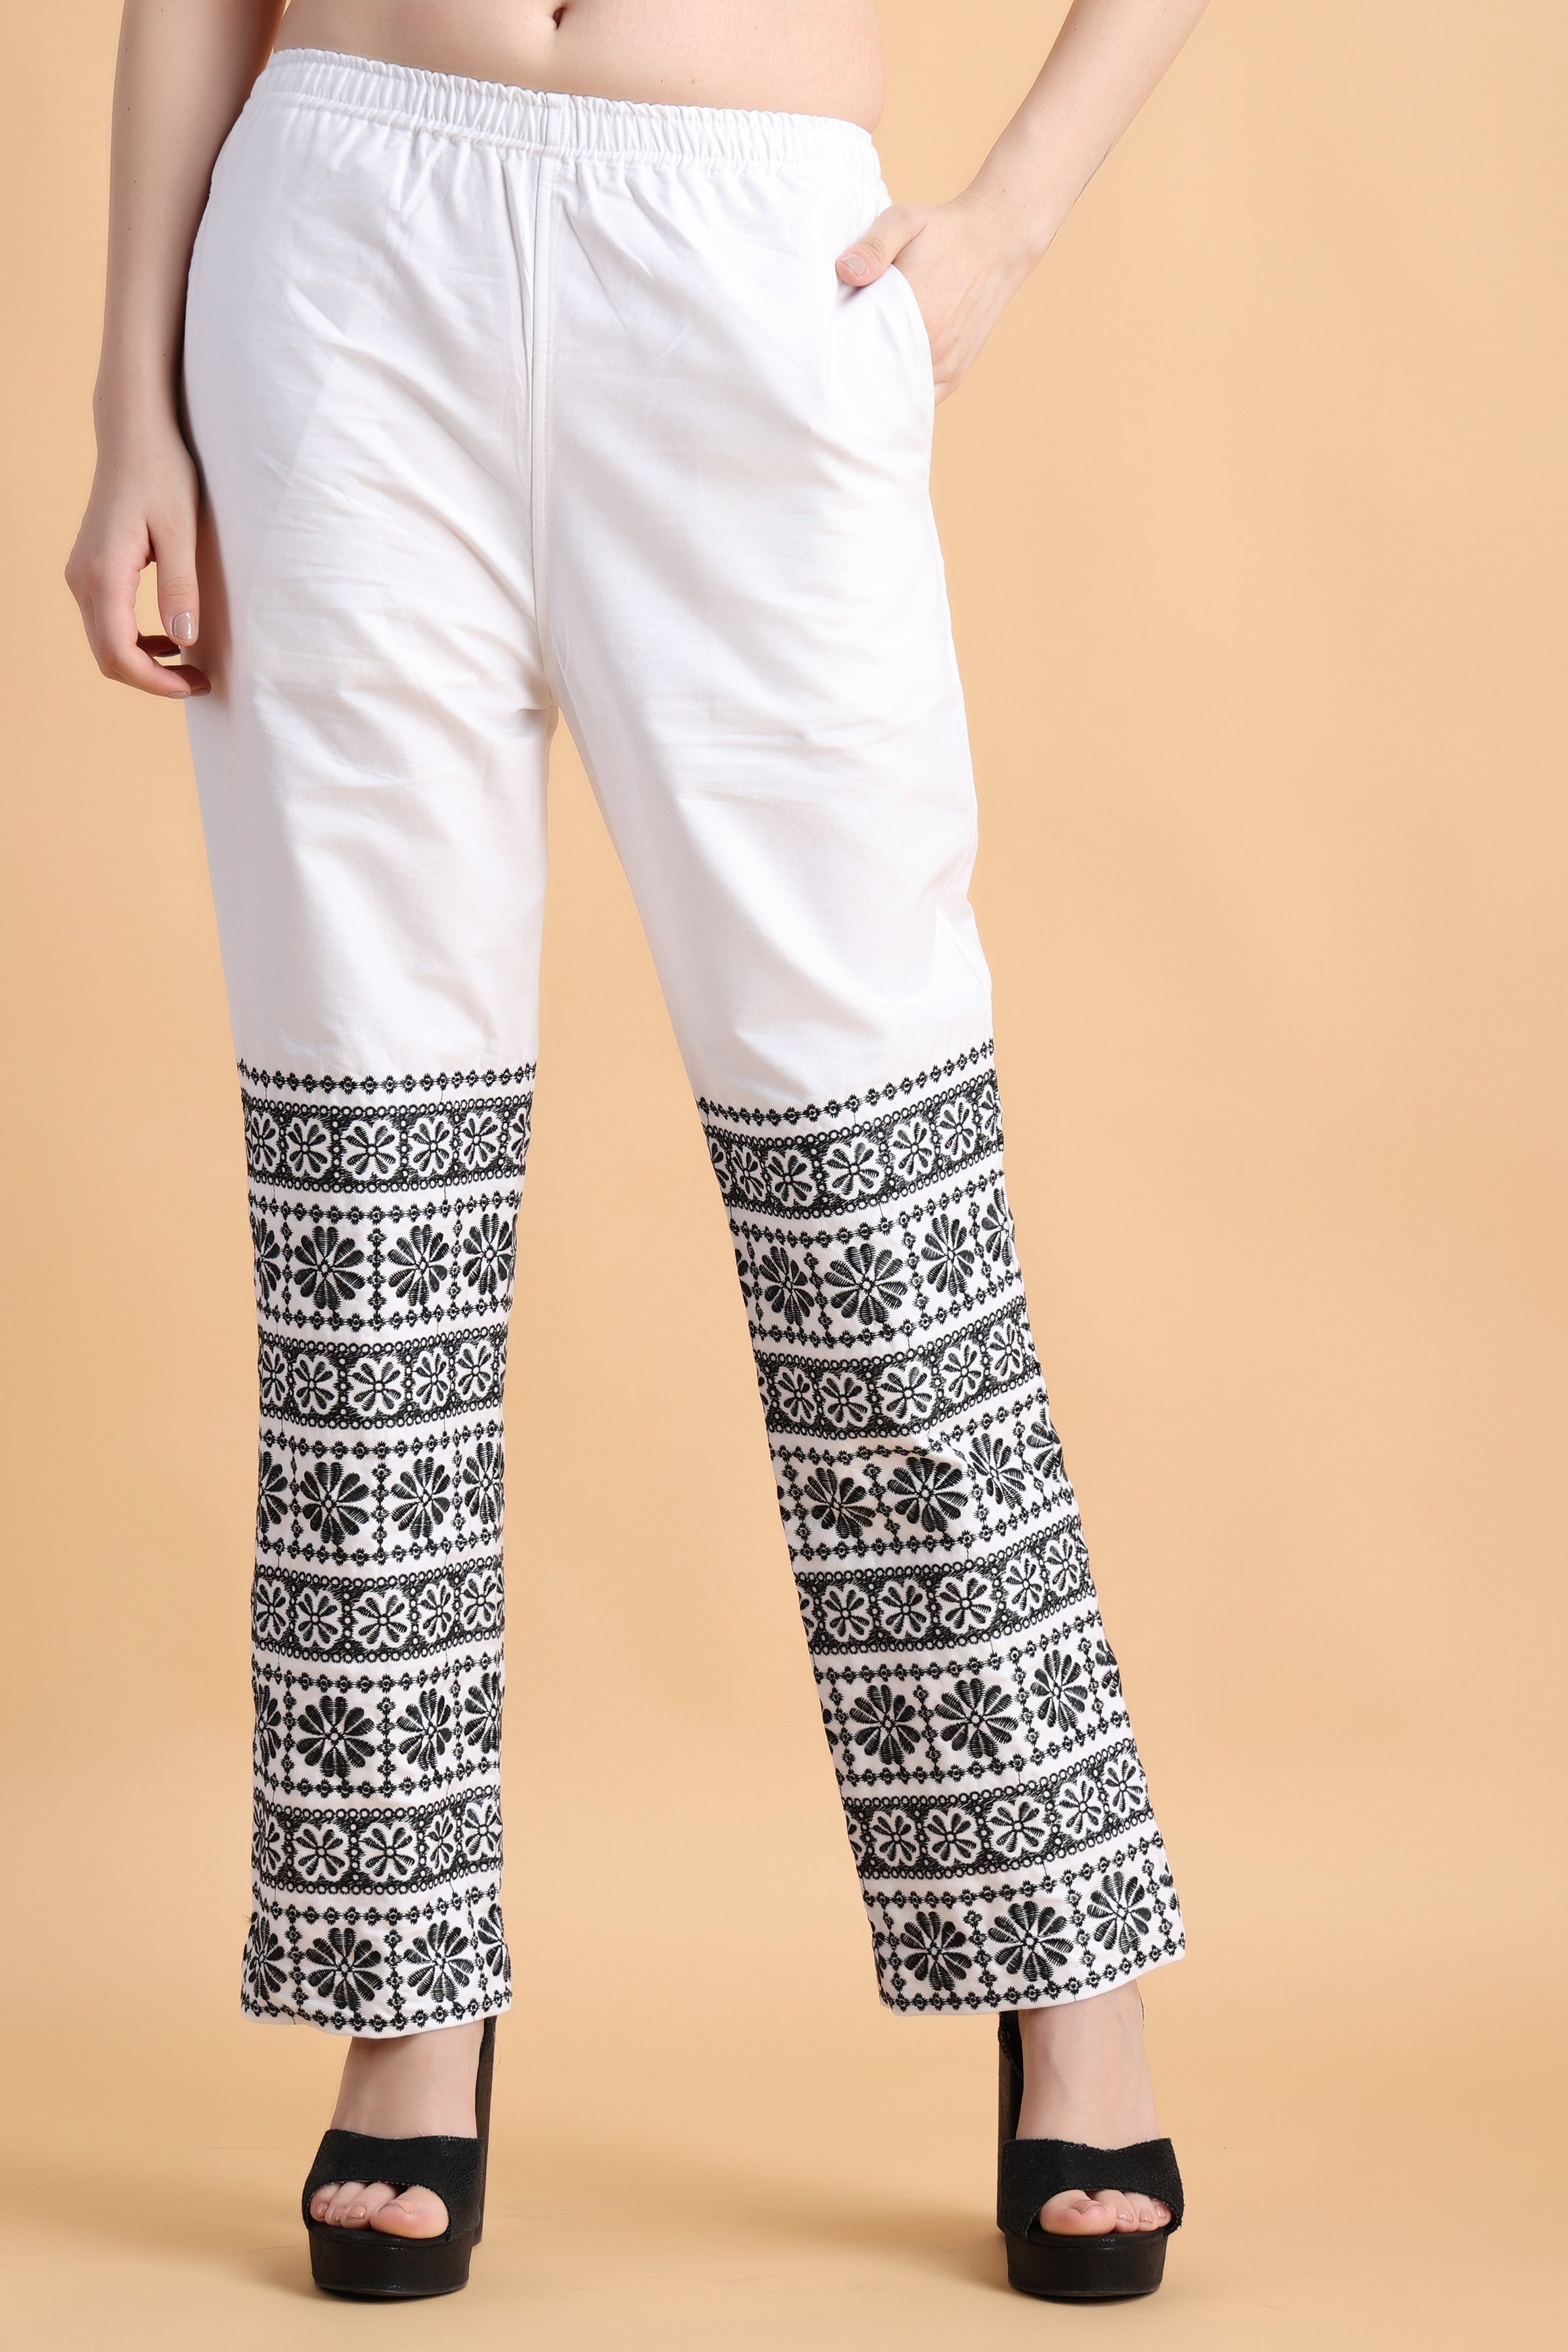 Cotton Printed Night Pants For Women Lowers With Pockets Blue  Cupid  Clothings